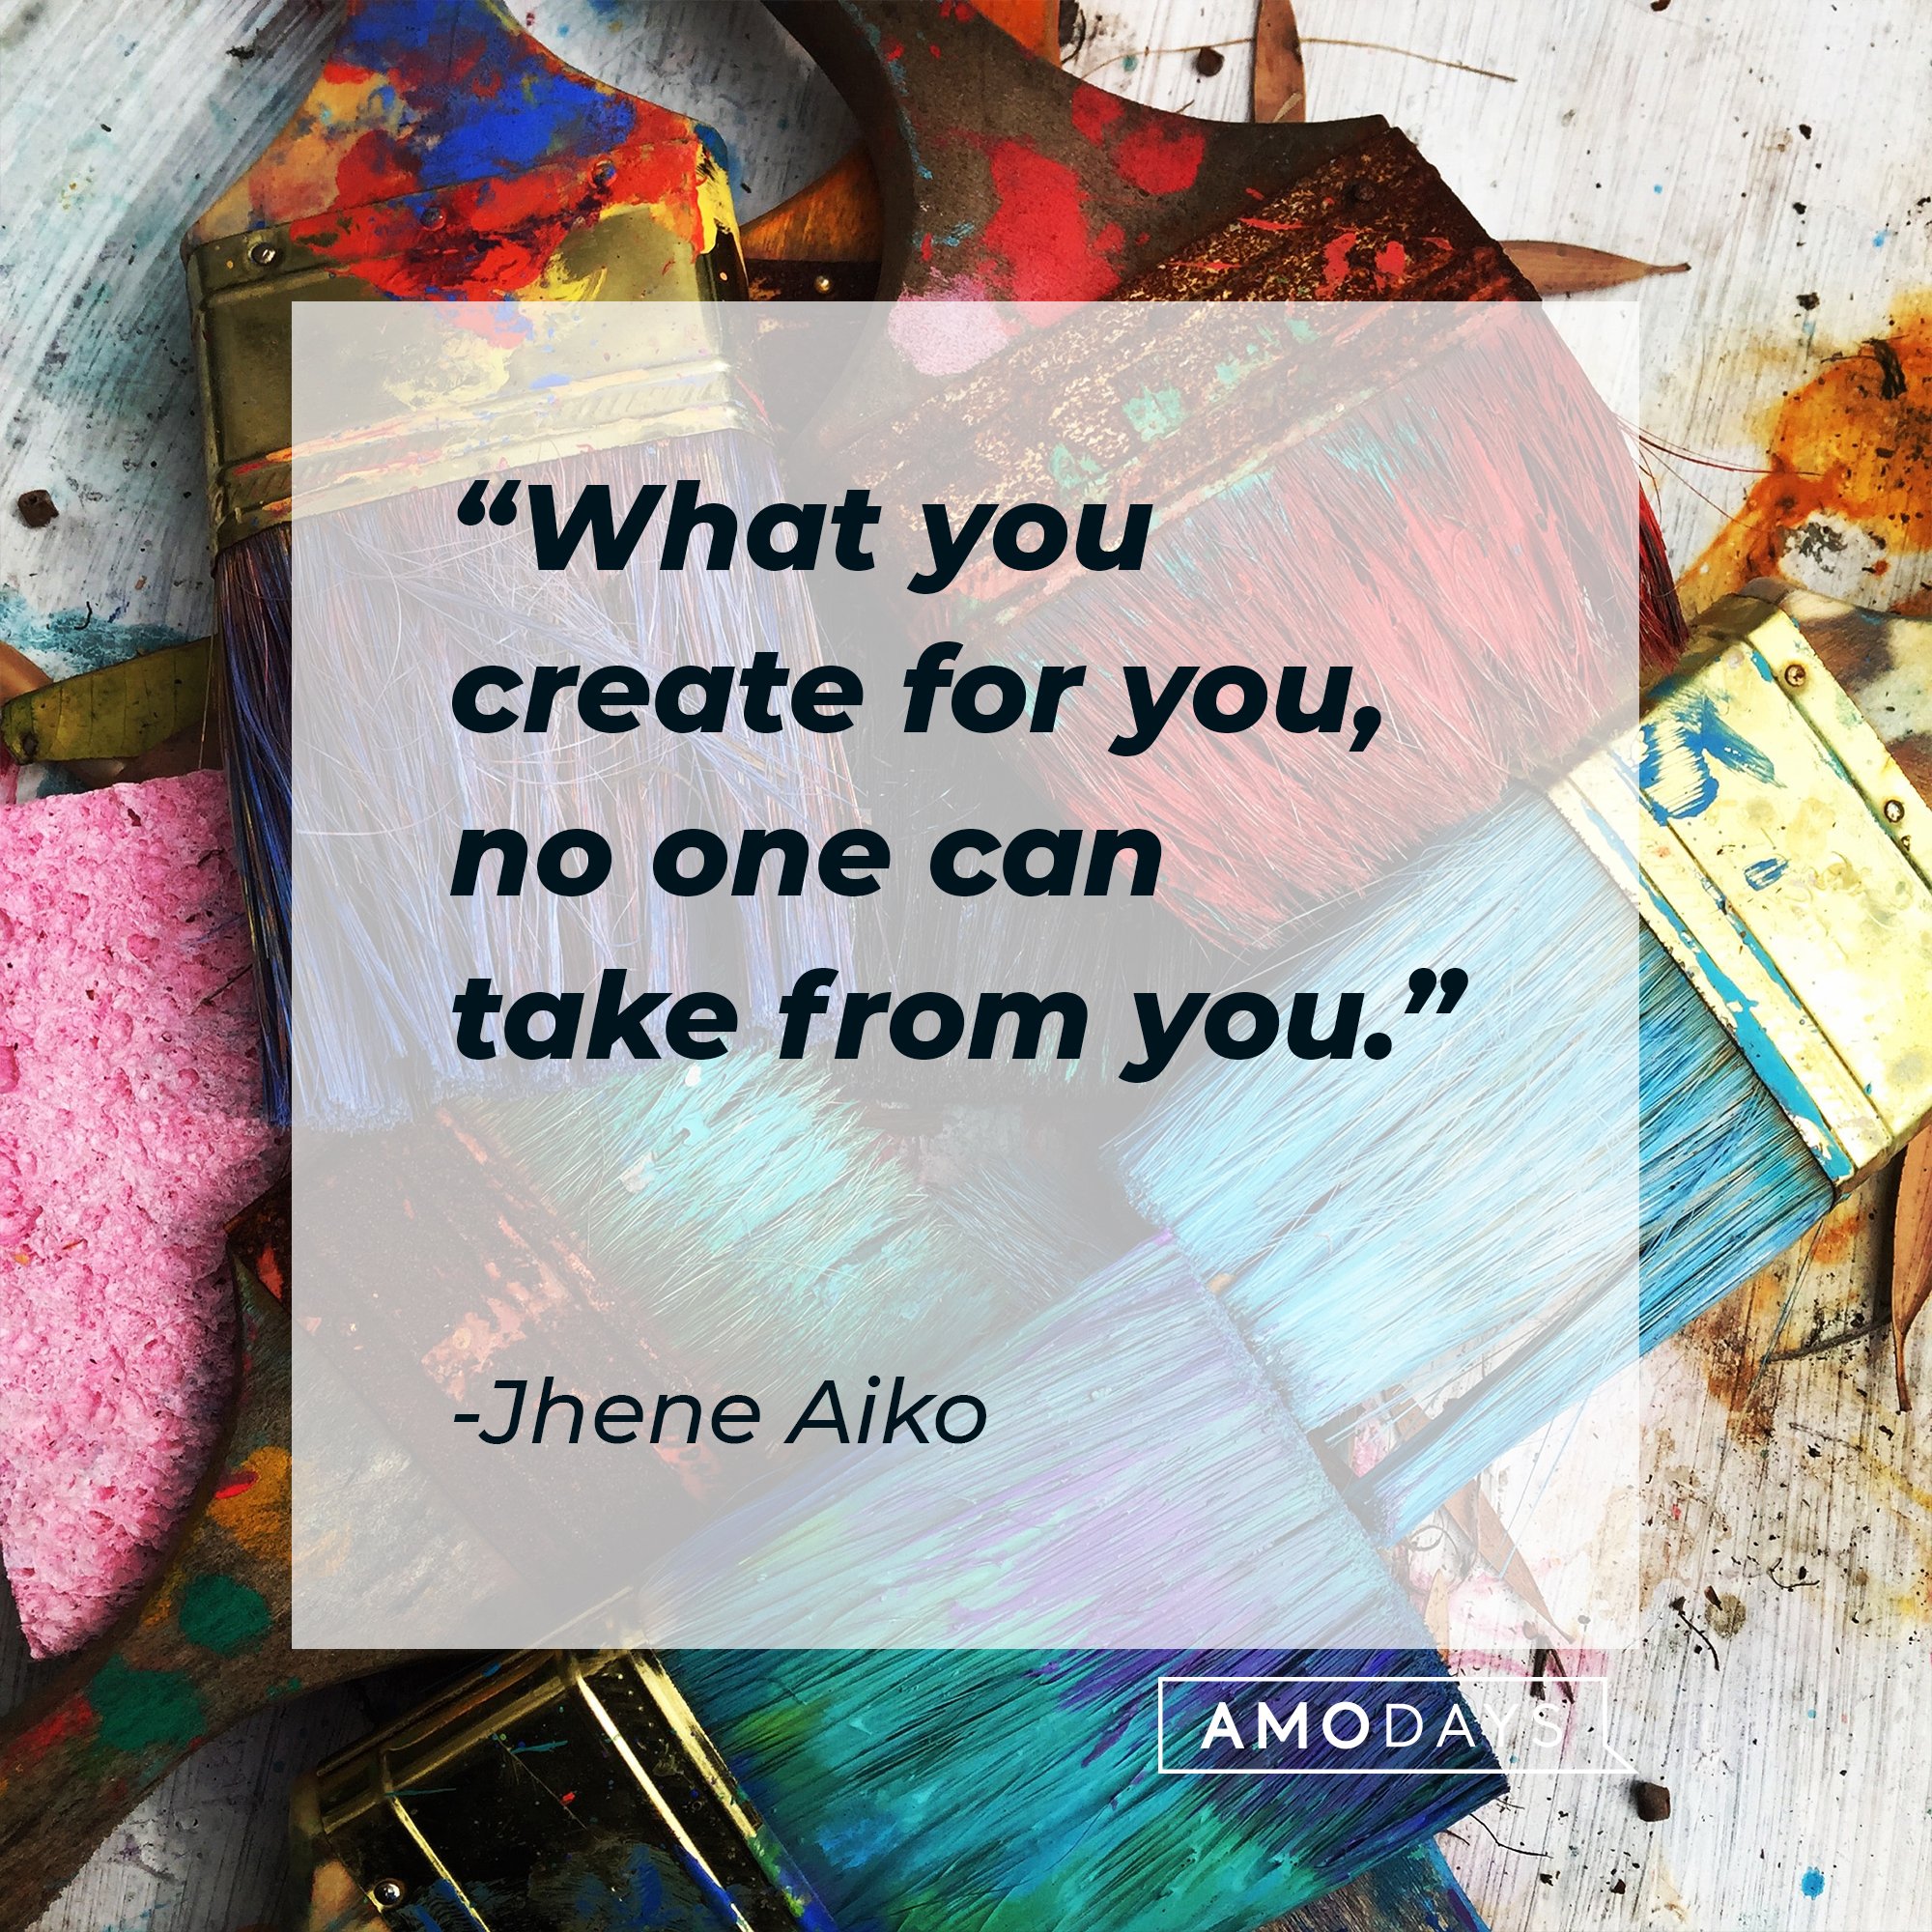  Jhene Aiko's quote: "What you create for you, no one can take from you." | Image: AmoDays